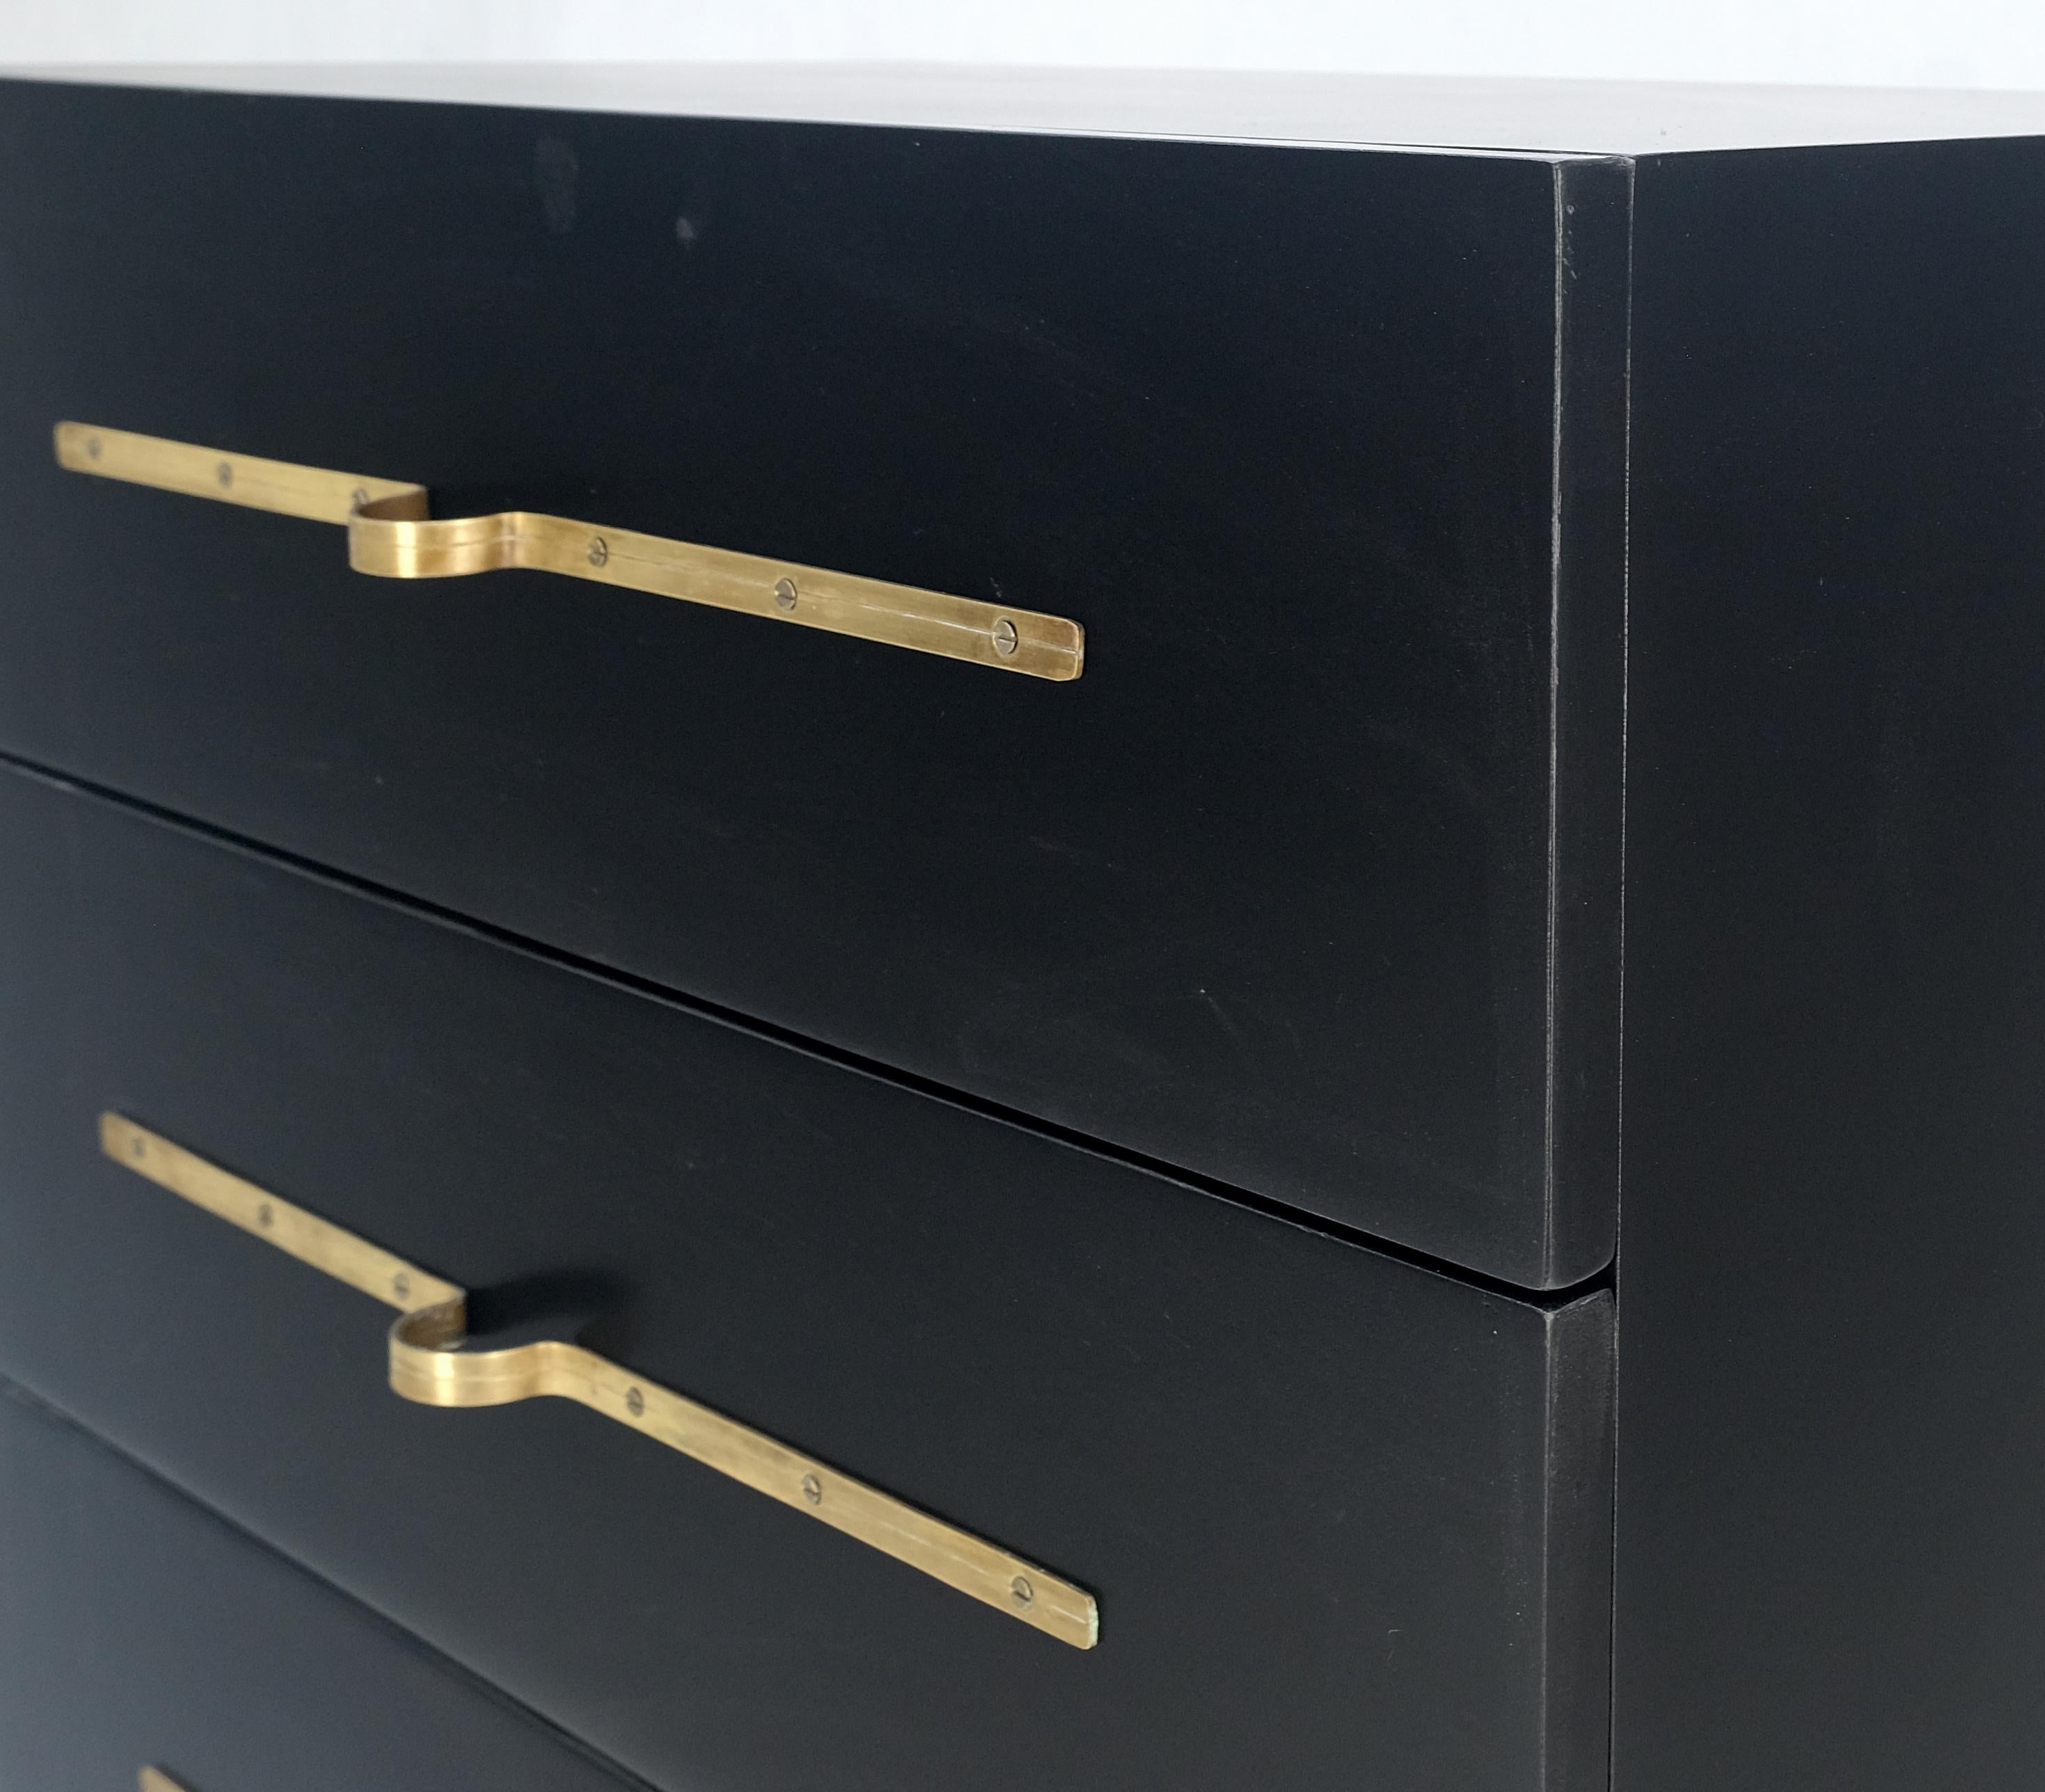 Black Lacquer Solid Brass Decorative Hardware 3 Drawers Bachelor Chest Dresser  In Excellent Condition For Sale In Rockaway, NJ